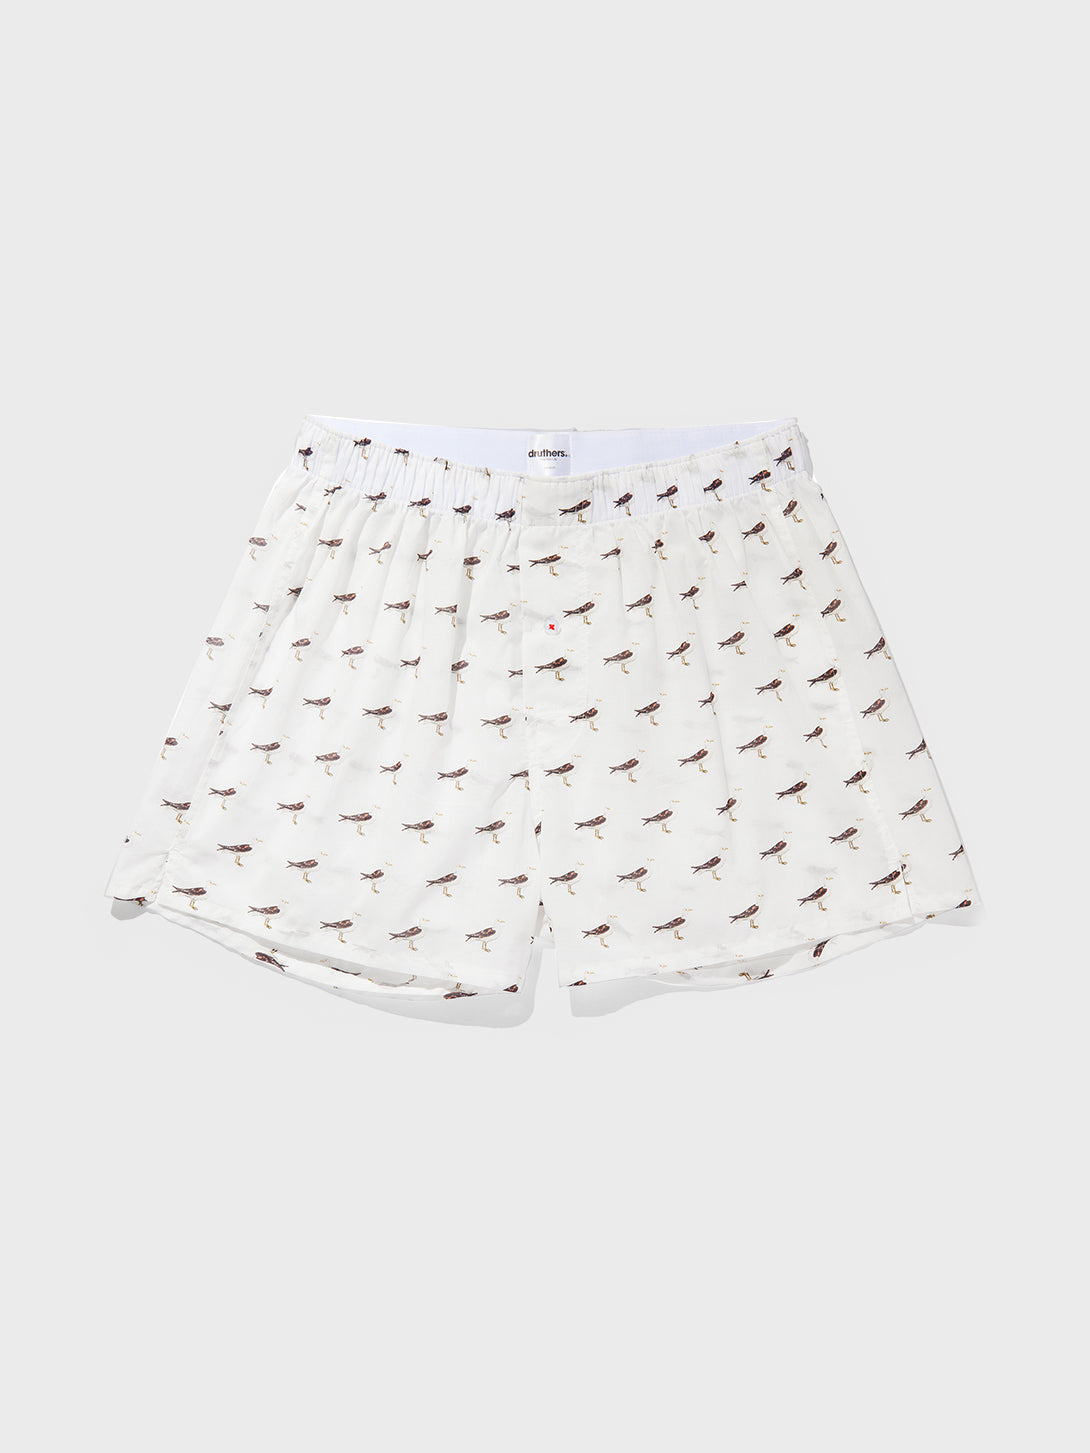 WHITE ons mens clothing druthers boxers 